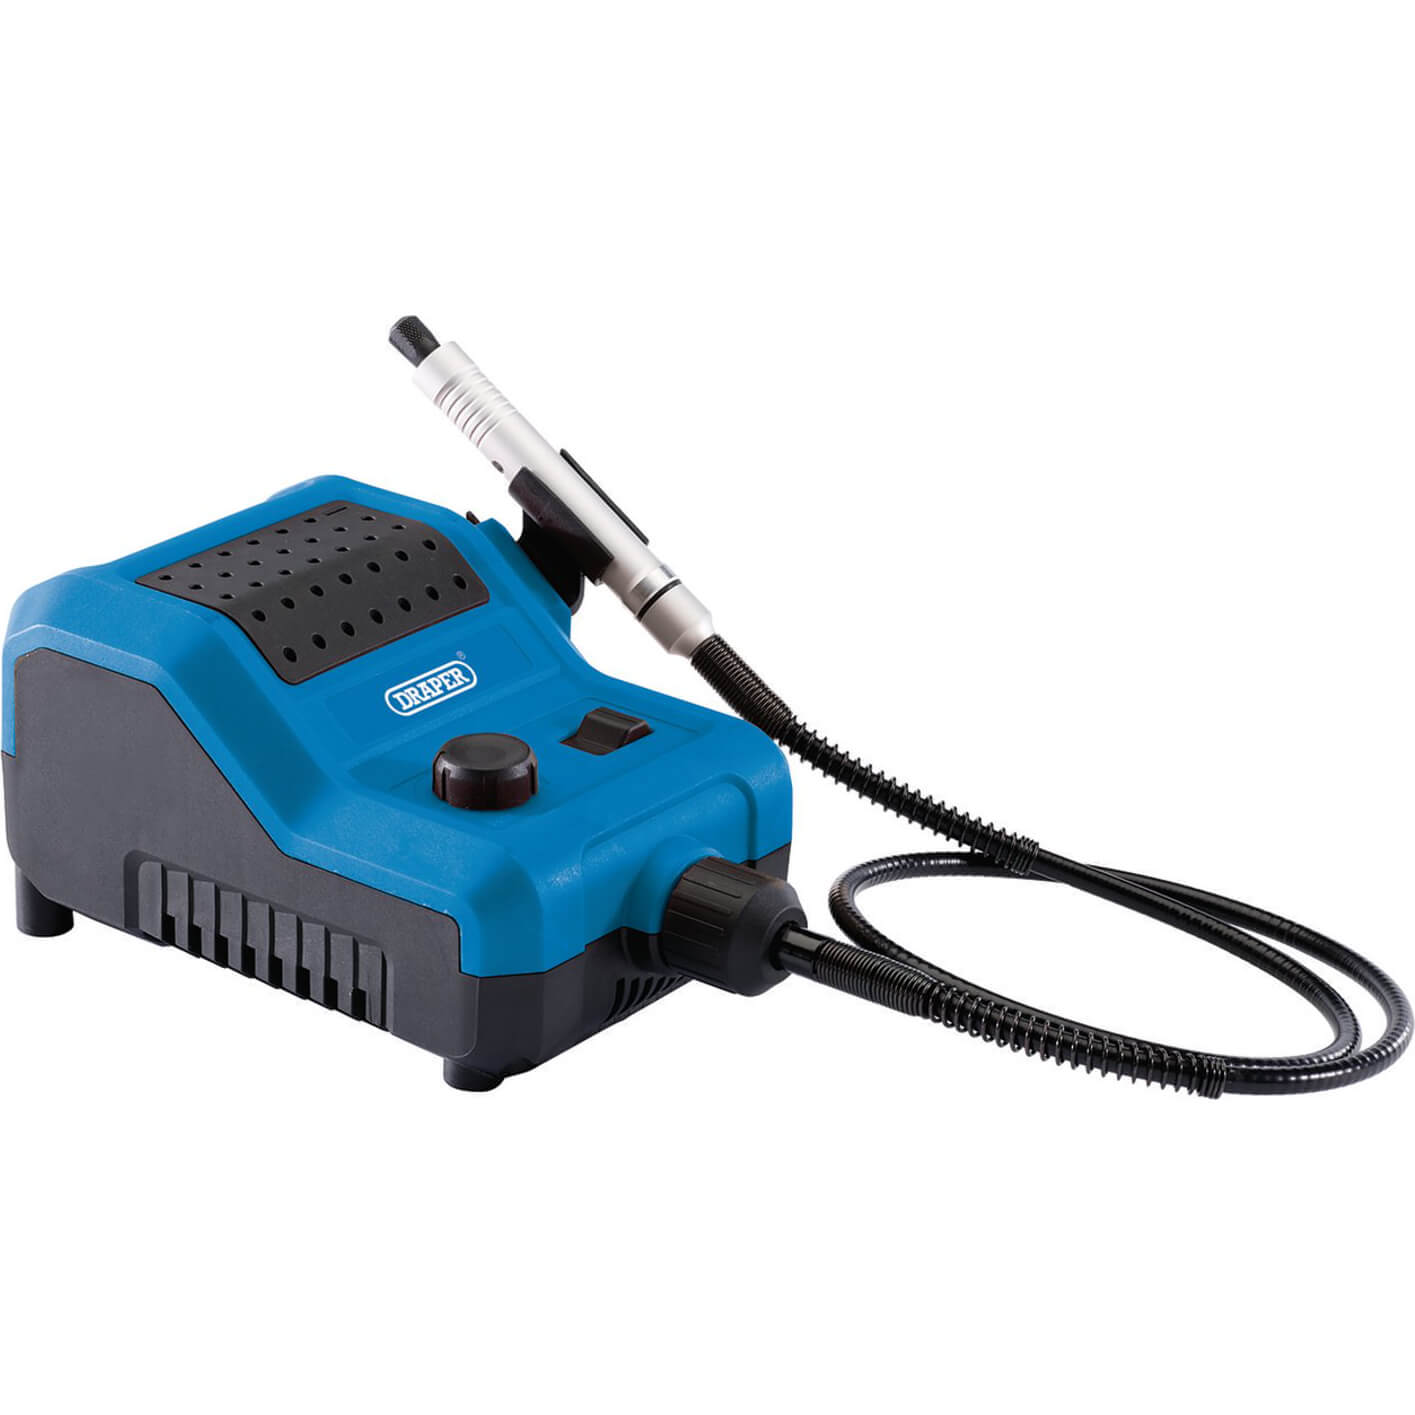 Image of Draper D20EG D20 20v Cordless Grinding and Engraving Rotary Tool Kit No Batteries No Charger No Case